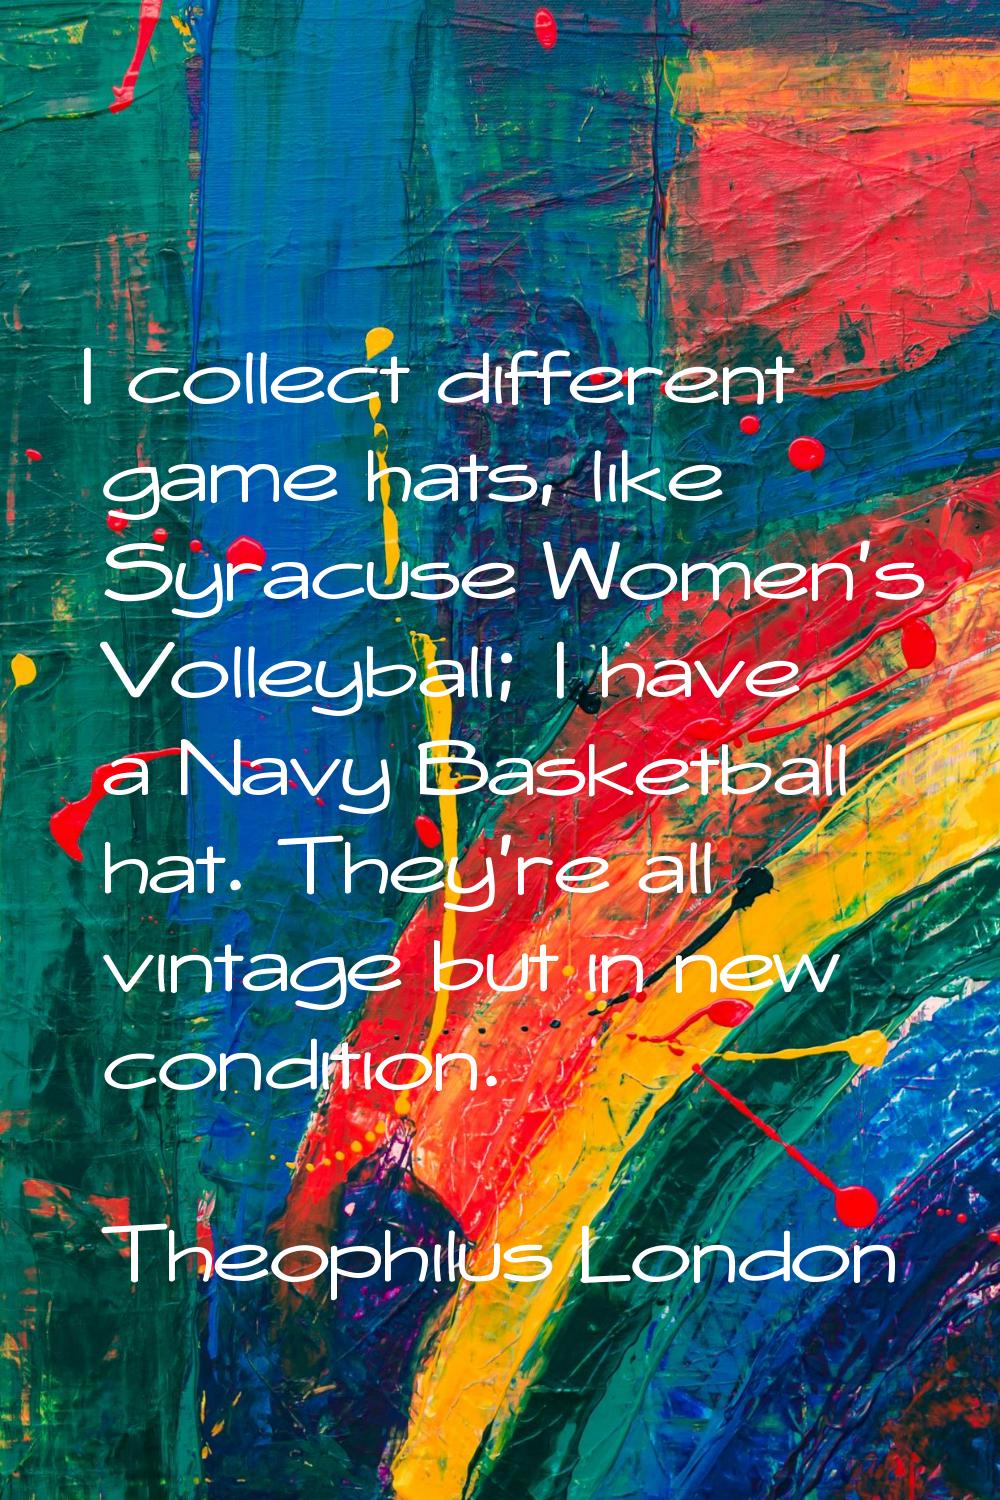 I collect different game hats, like Syracuse Women's Volleyball; I have a Navy Basketball hat. They